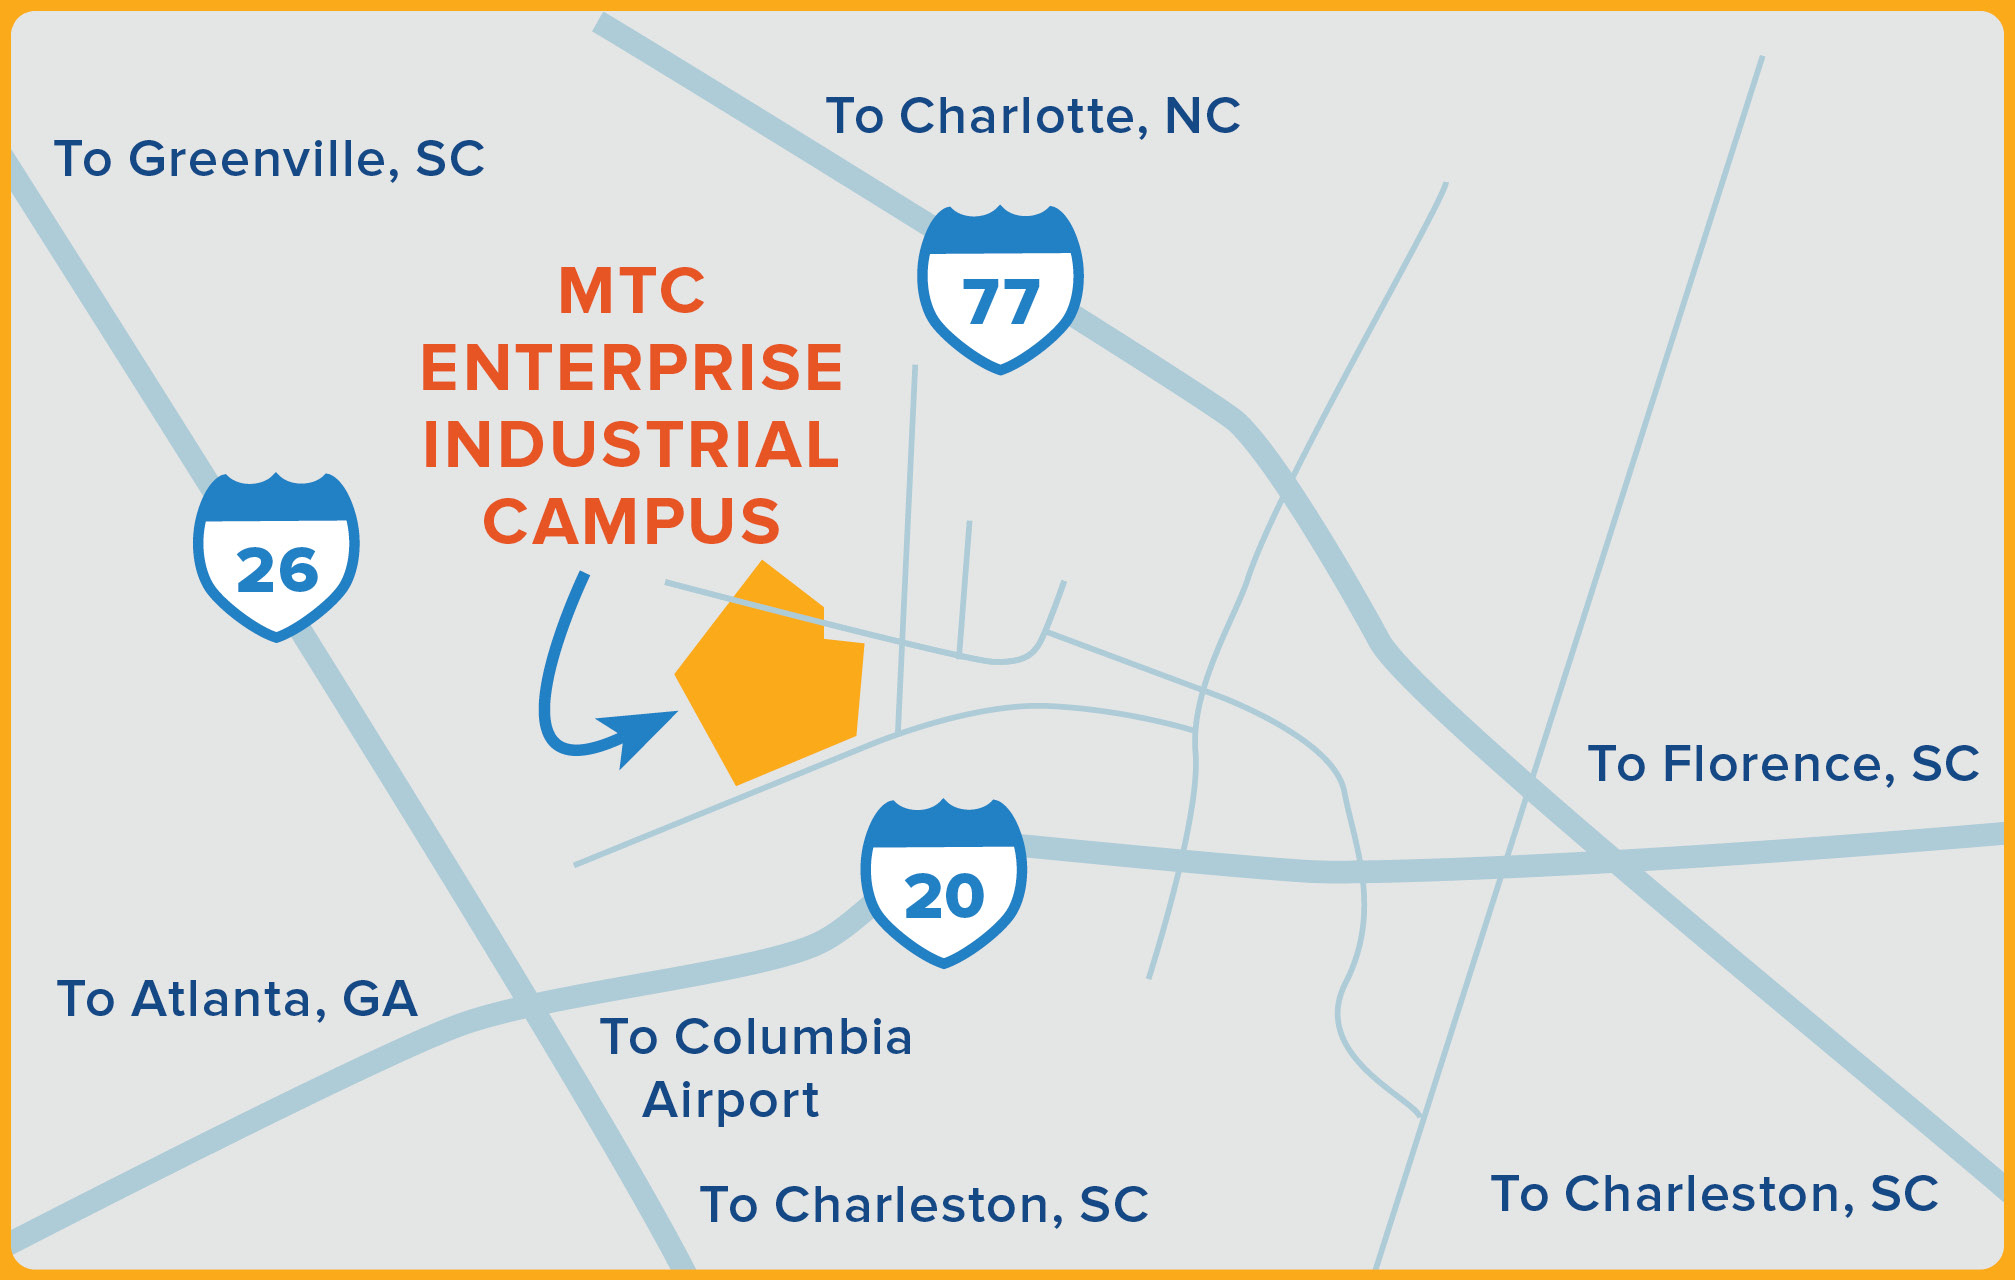 General location map showing the MTC Enterprise Industrial Campus' proximity to interstates 26, 20, and 77.